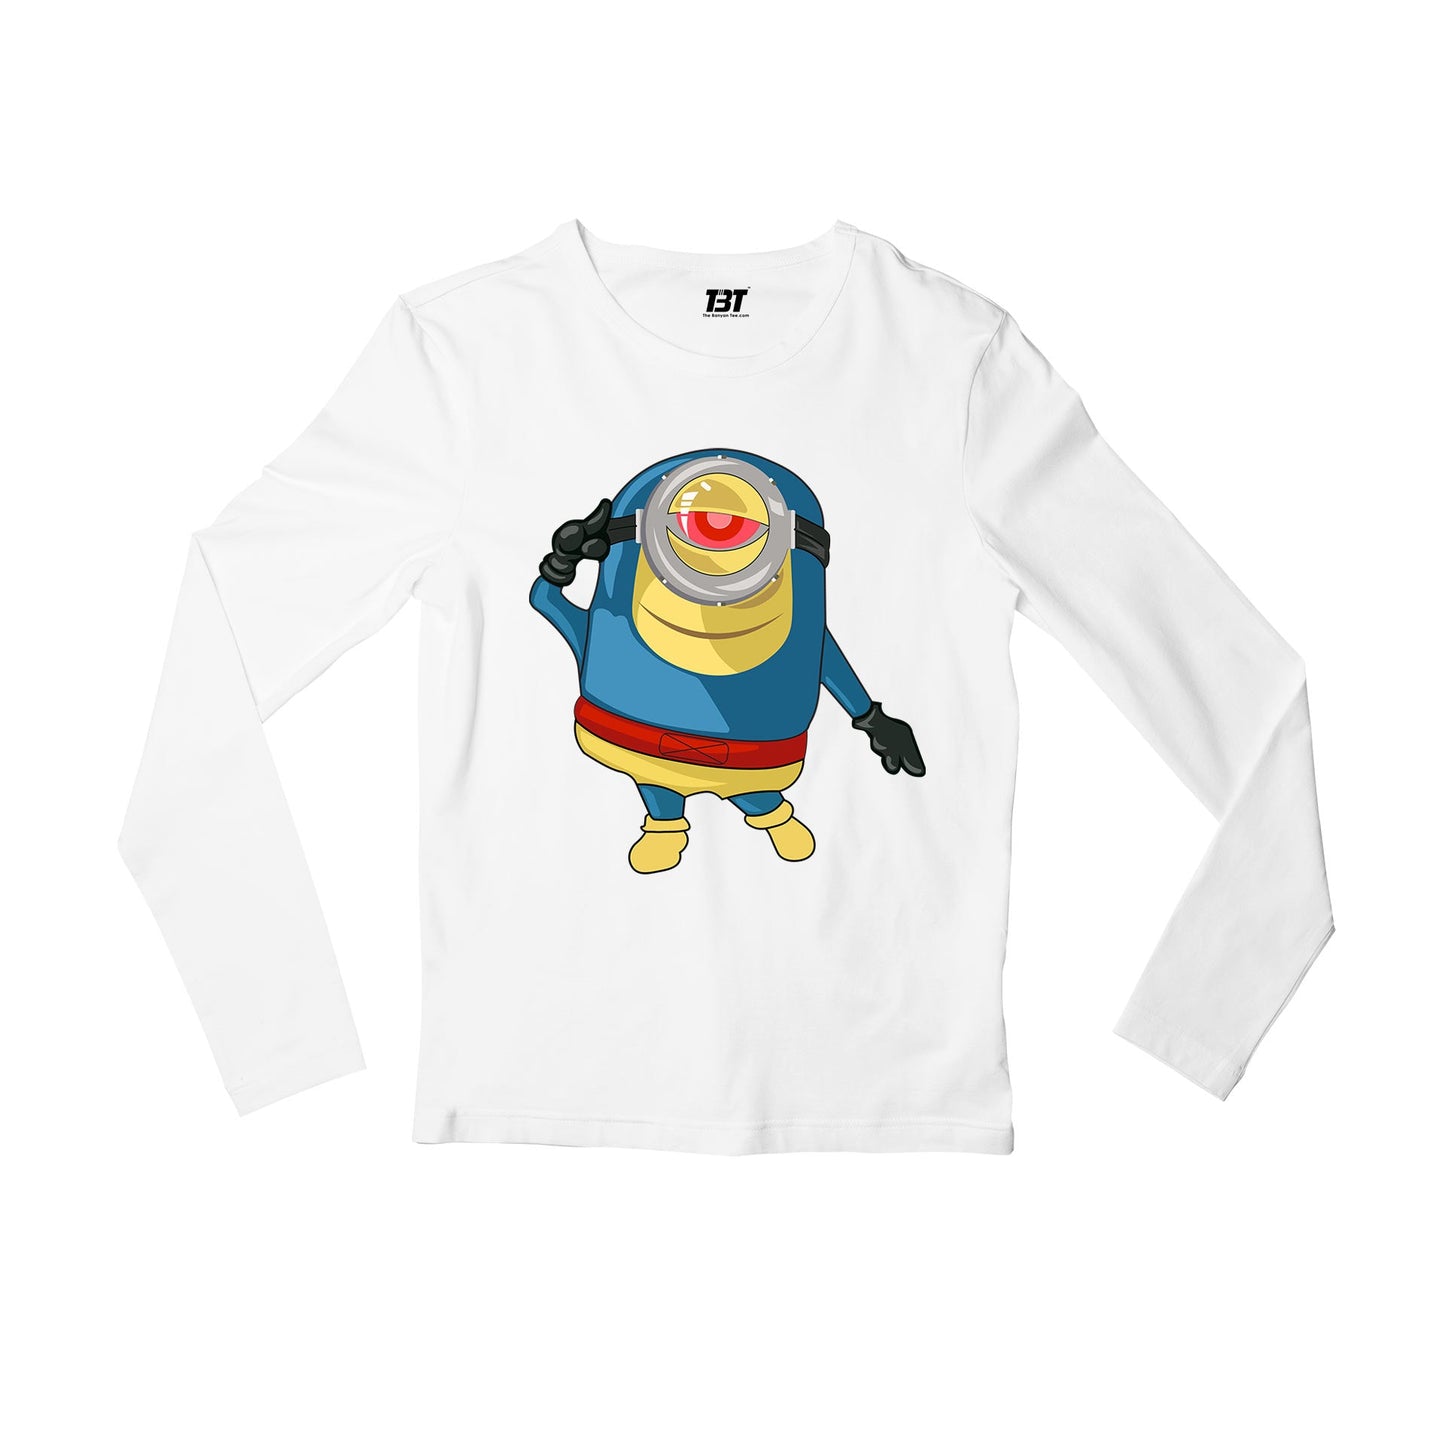 Minions Full Sleeves T-shirt - Supermin Superman Full Sleeves T-shirt The Banyan Tee TBT combo shirt long sleeves for men women unisex cool stylish online india